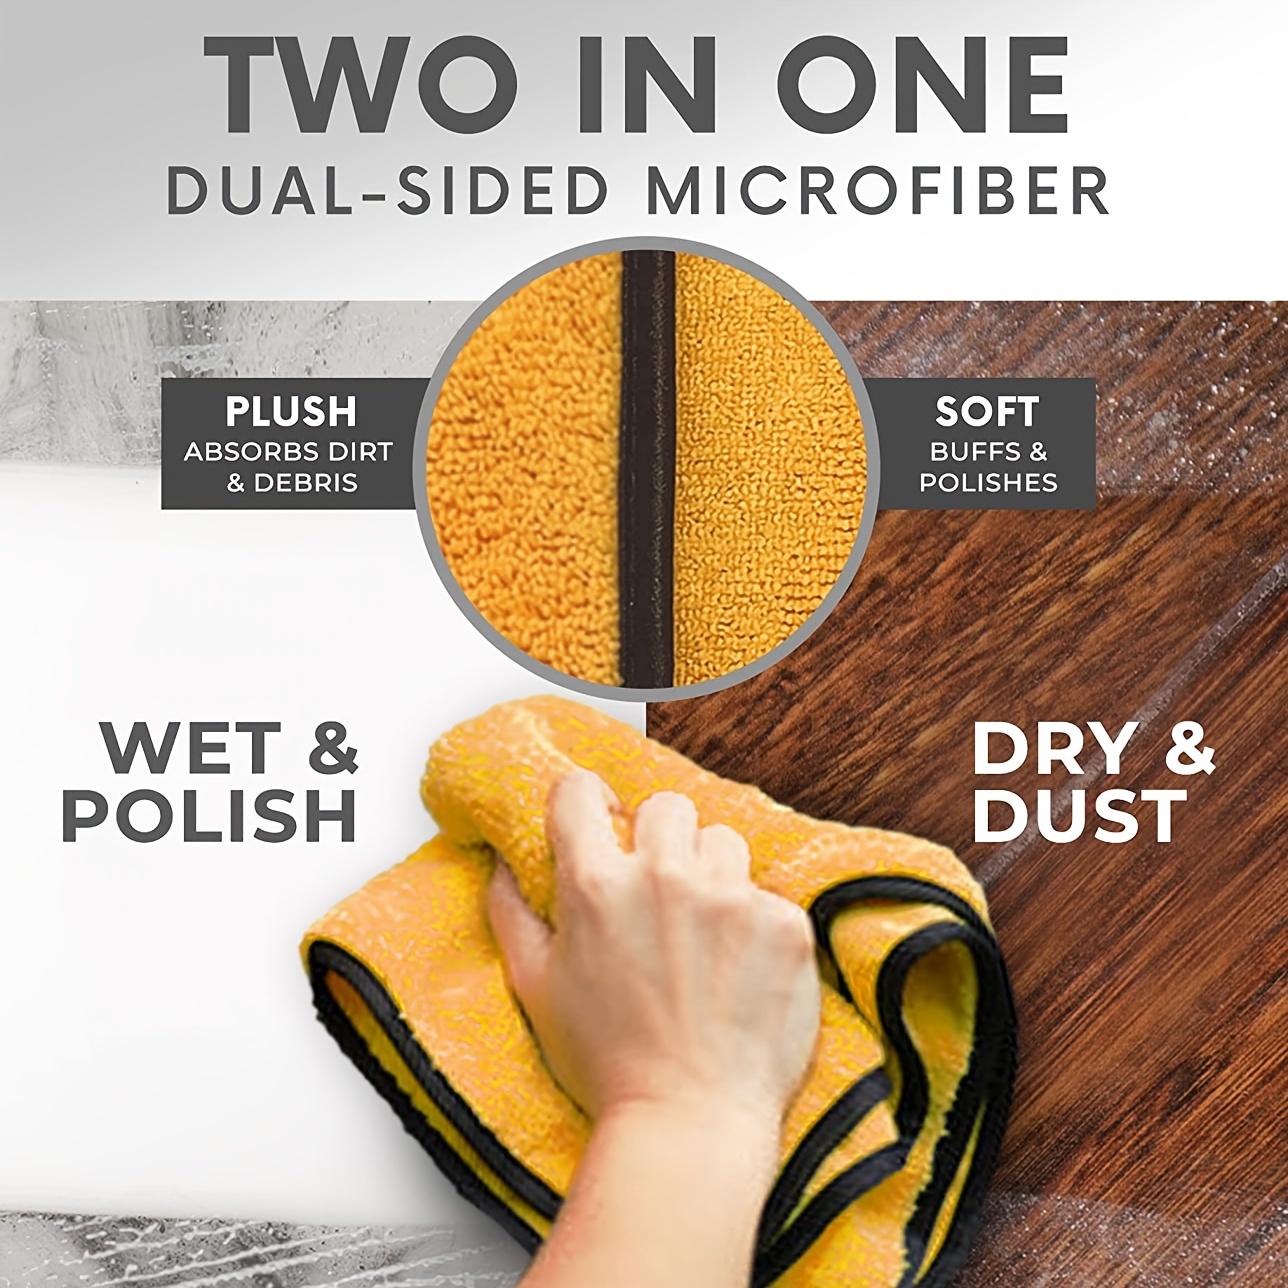 Double-sided Microfiber Soft Absorbent Towel Car Wash Pet Cleaning Towel  Cloth 